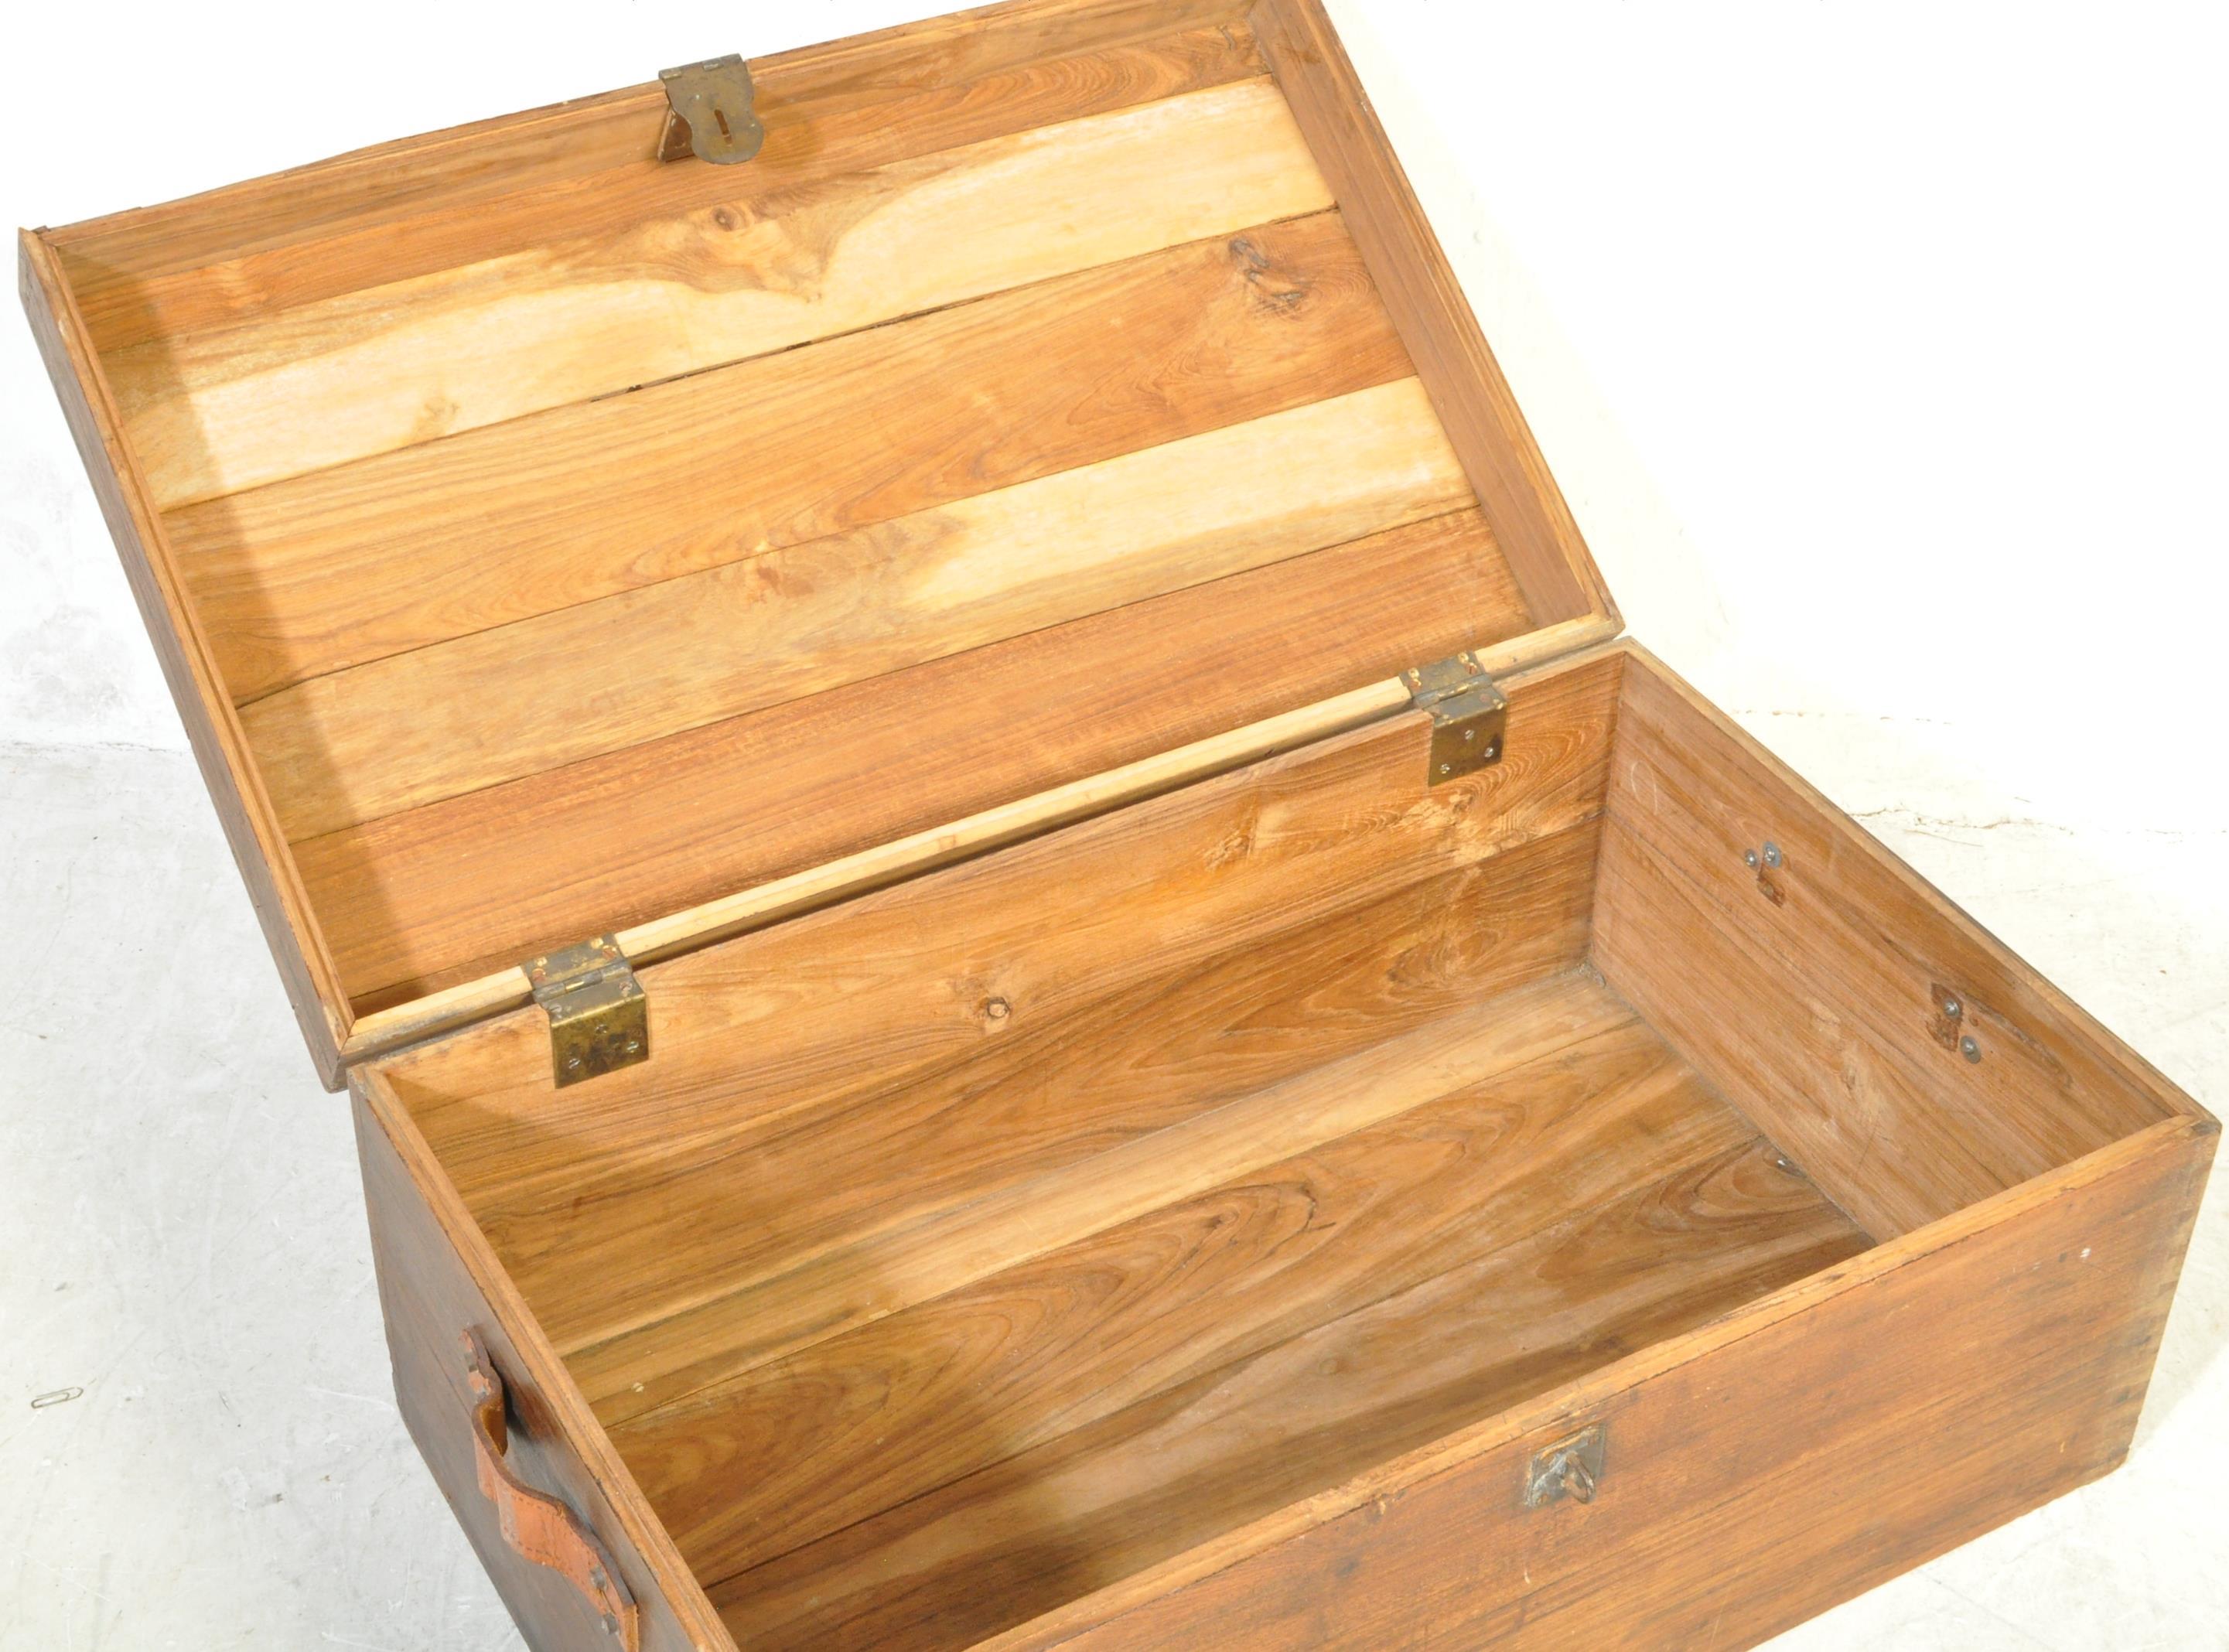 EARLY 20TH CENTURY CAMPHOR WOOD TRUNK CHEST - Image 3 of 4